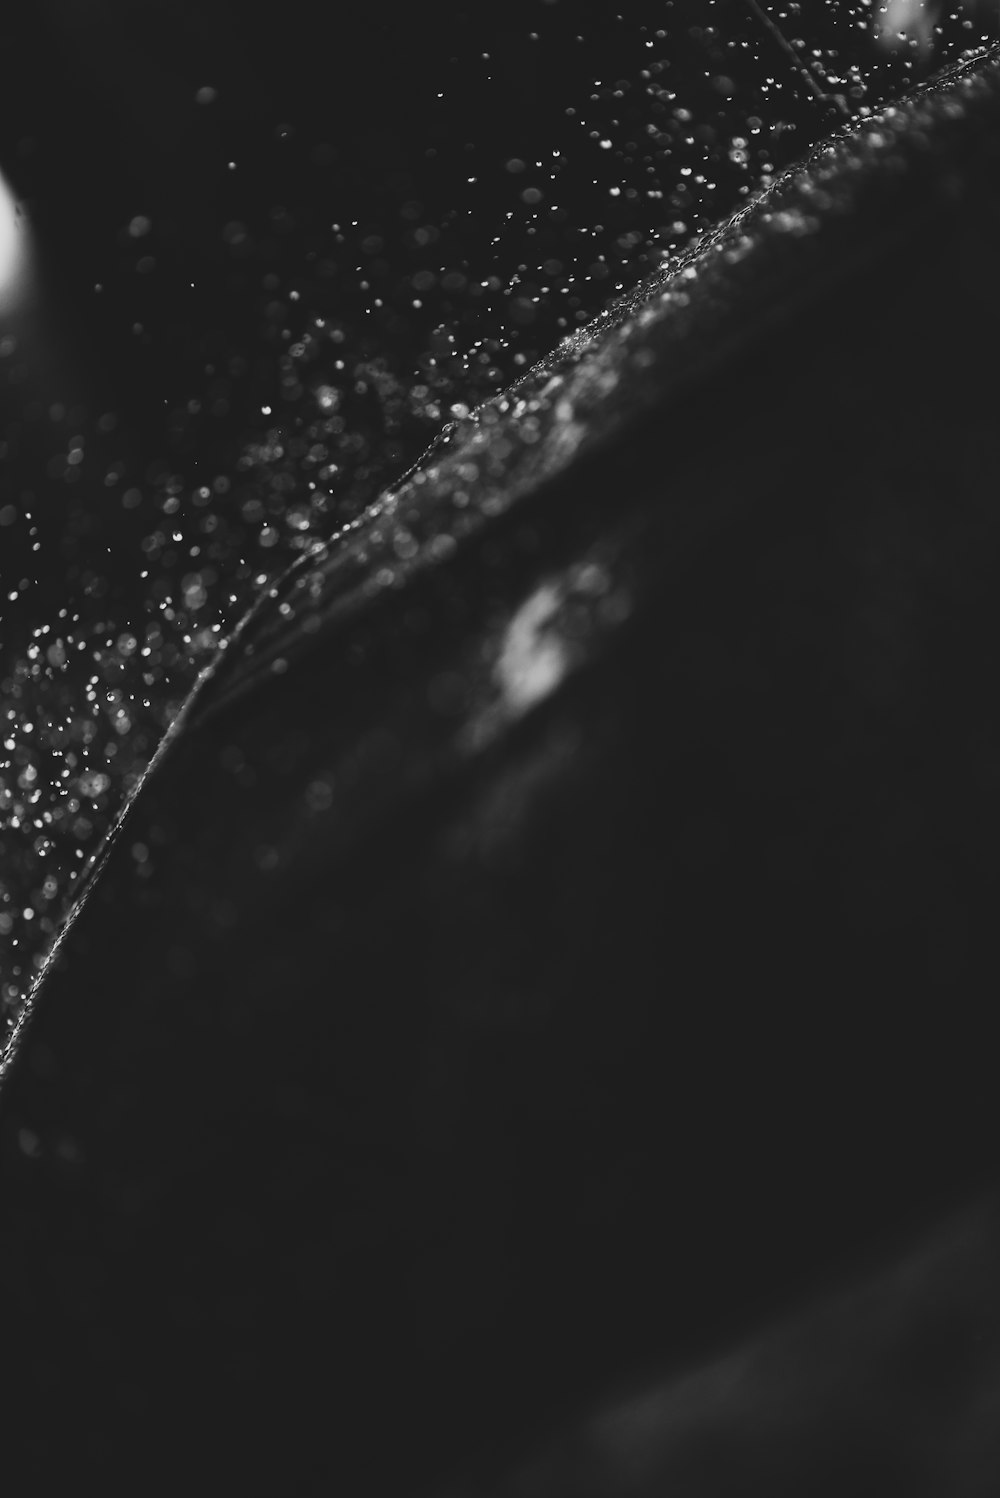 grayscale photo of water droplets on black surface